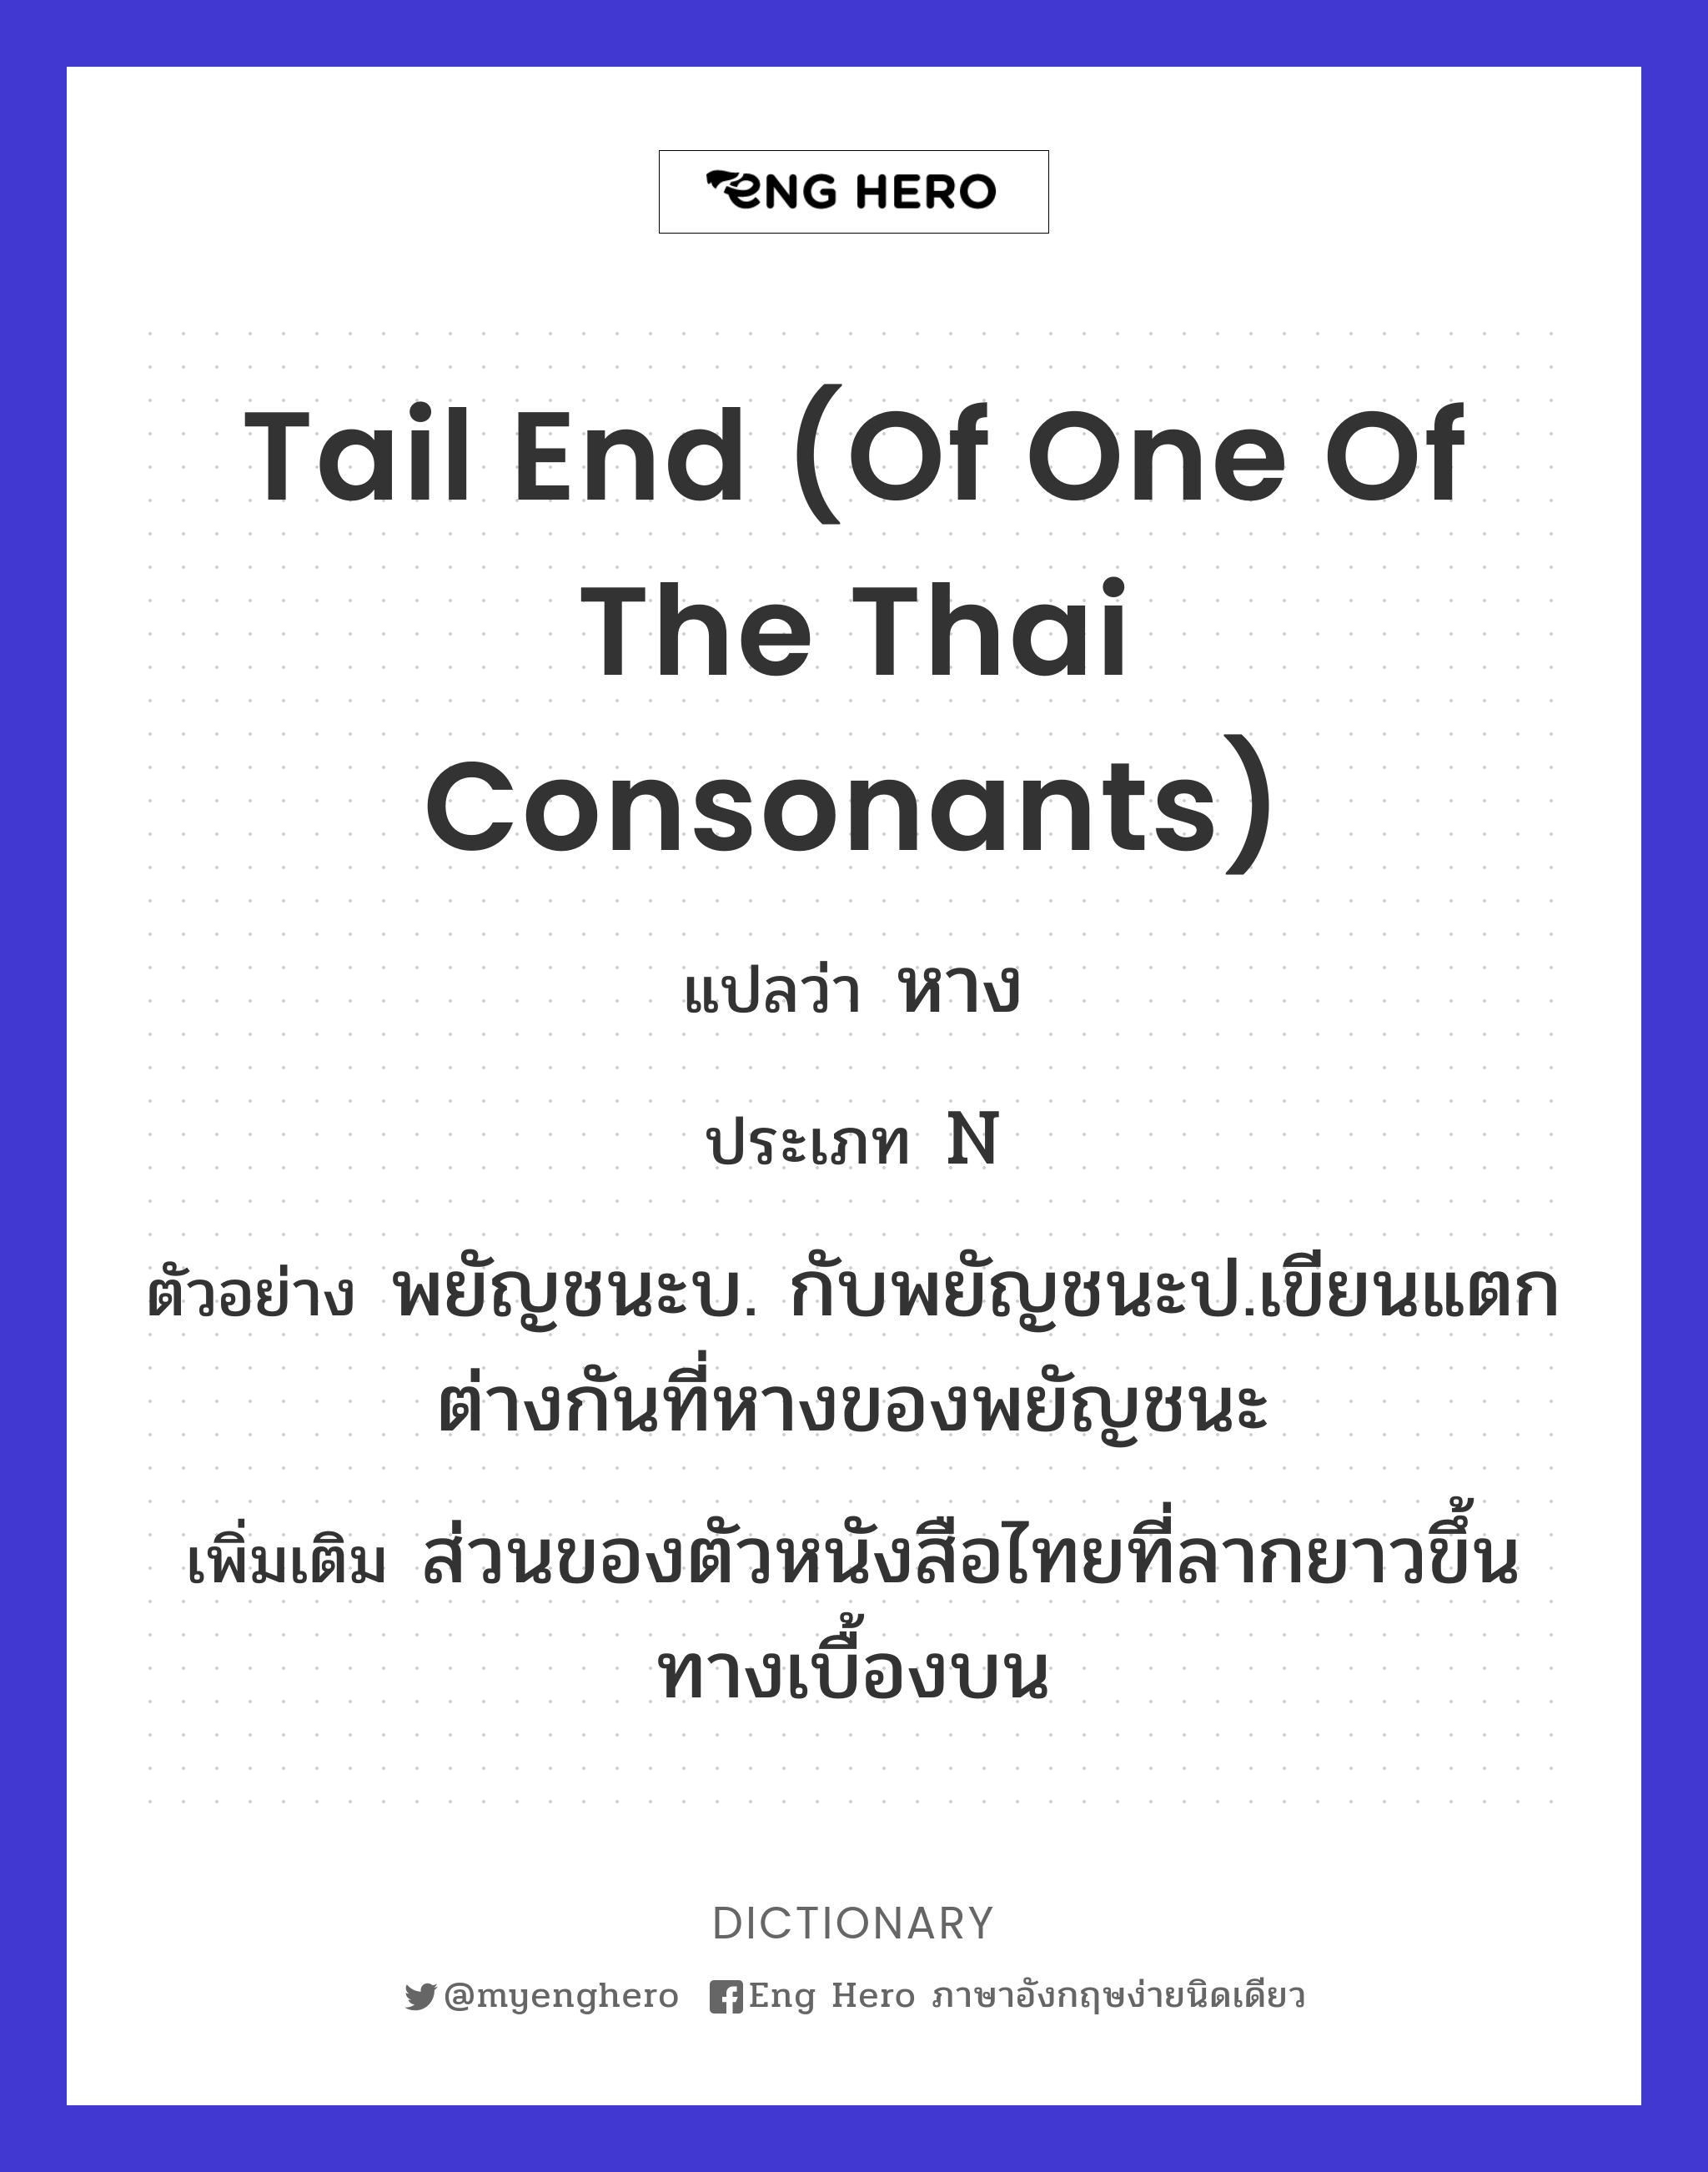 tail end (of one of the Thai consonants)